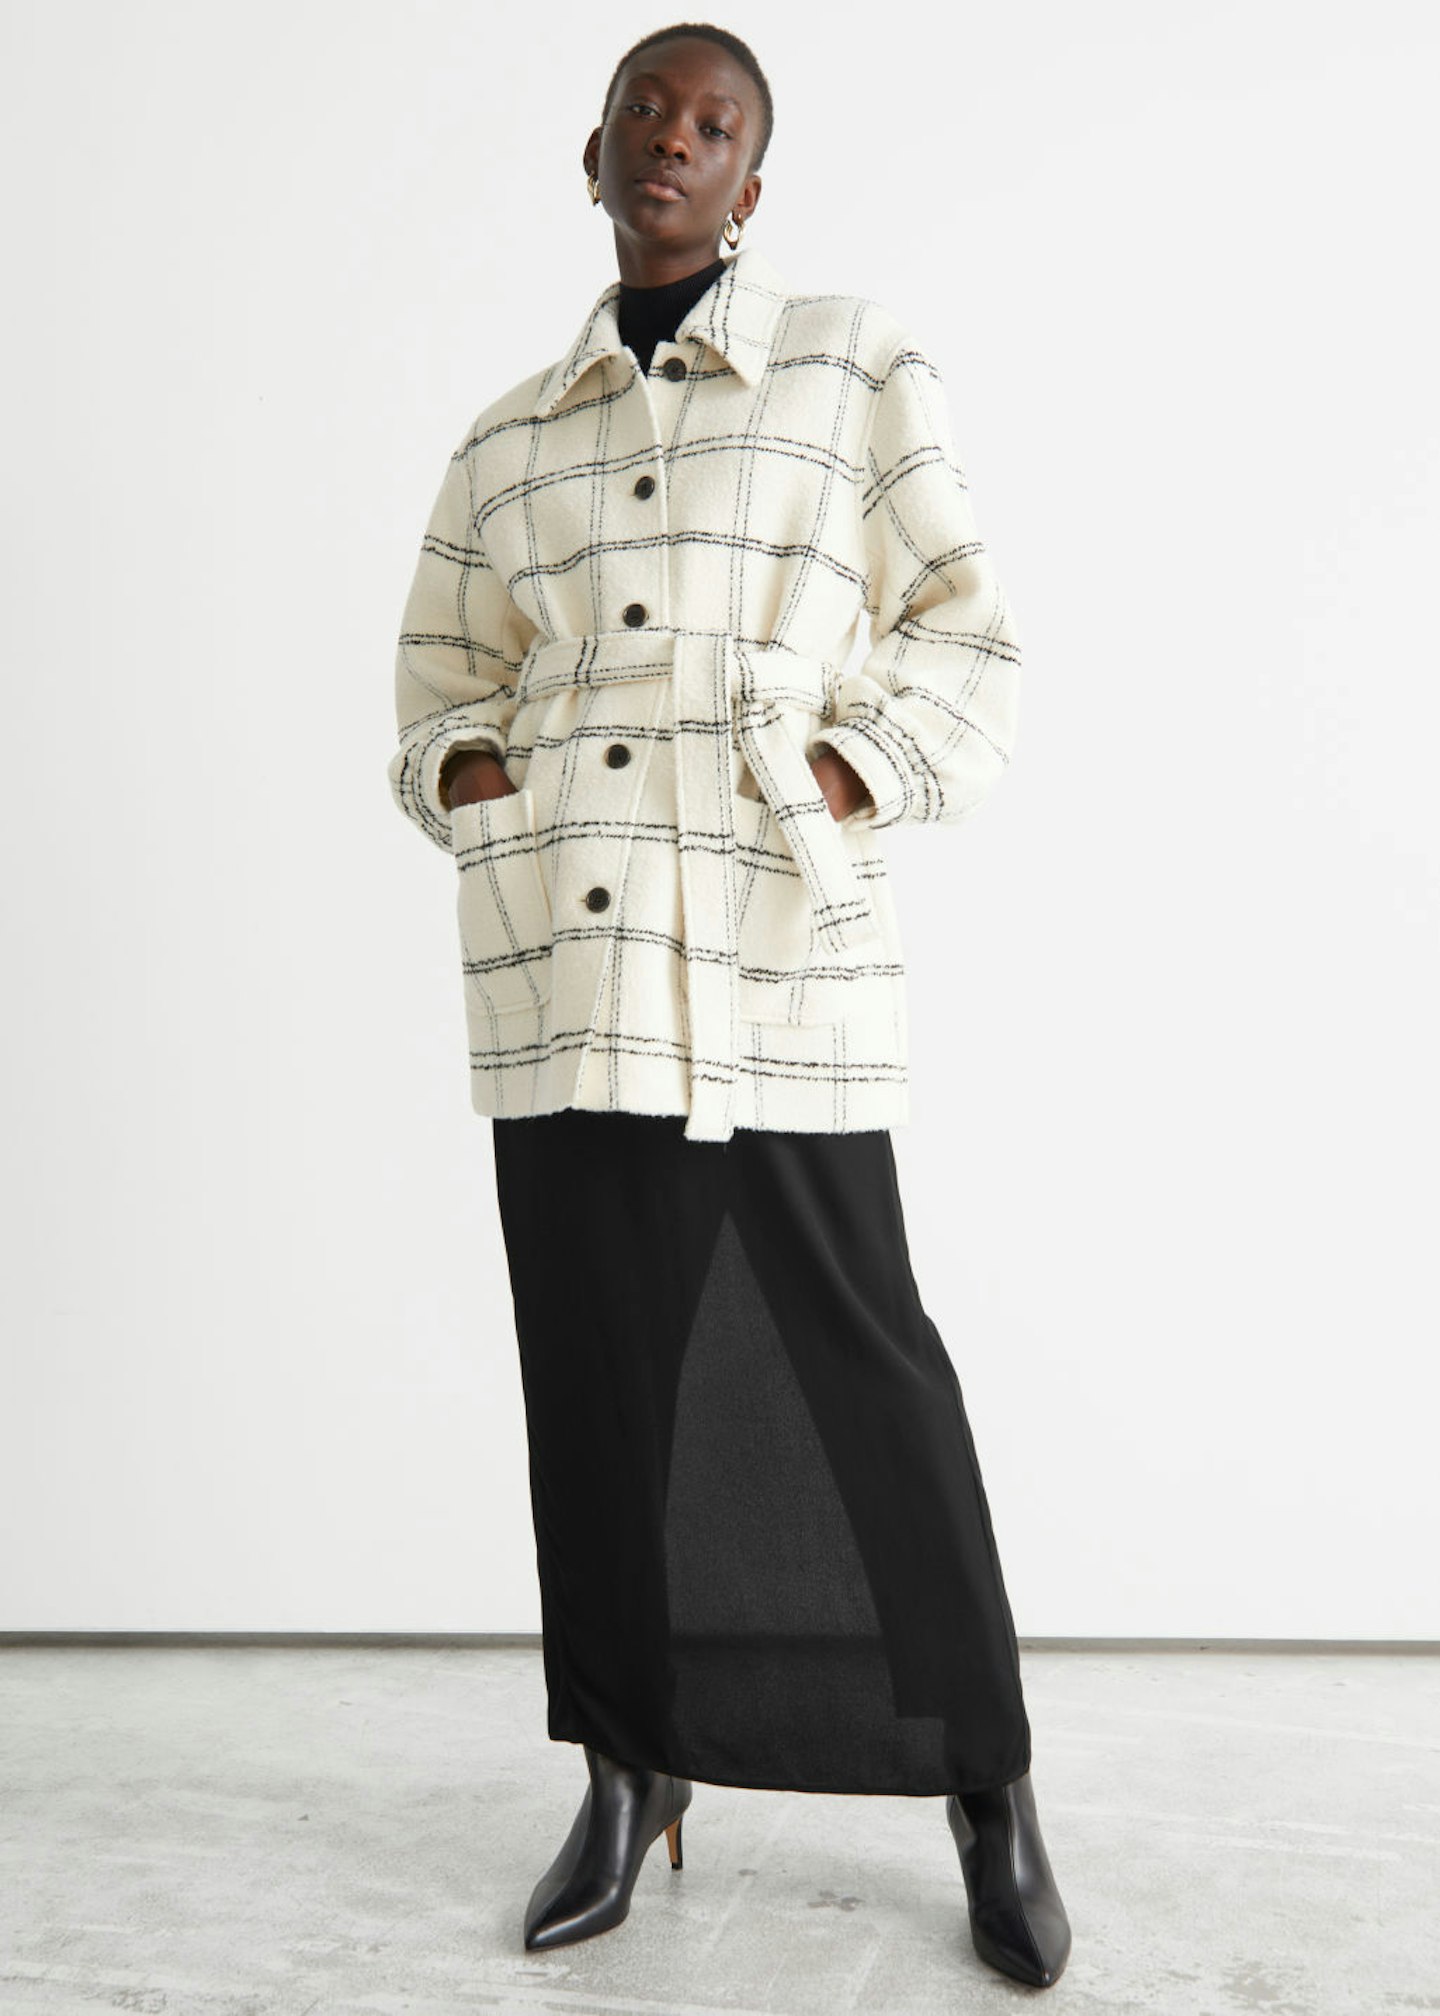 & Other Stories, Belted Wool Mix Coat, £175